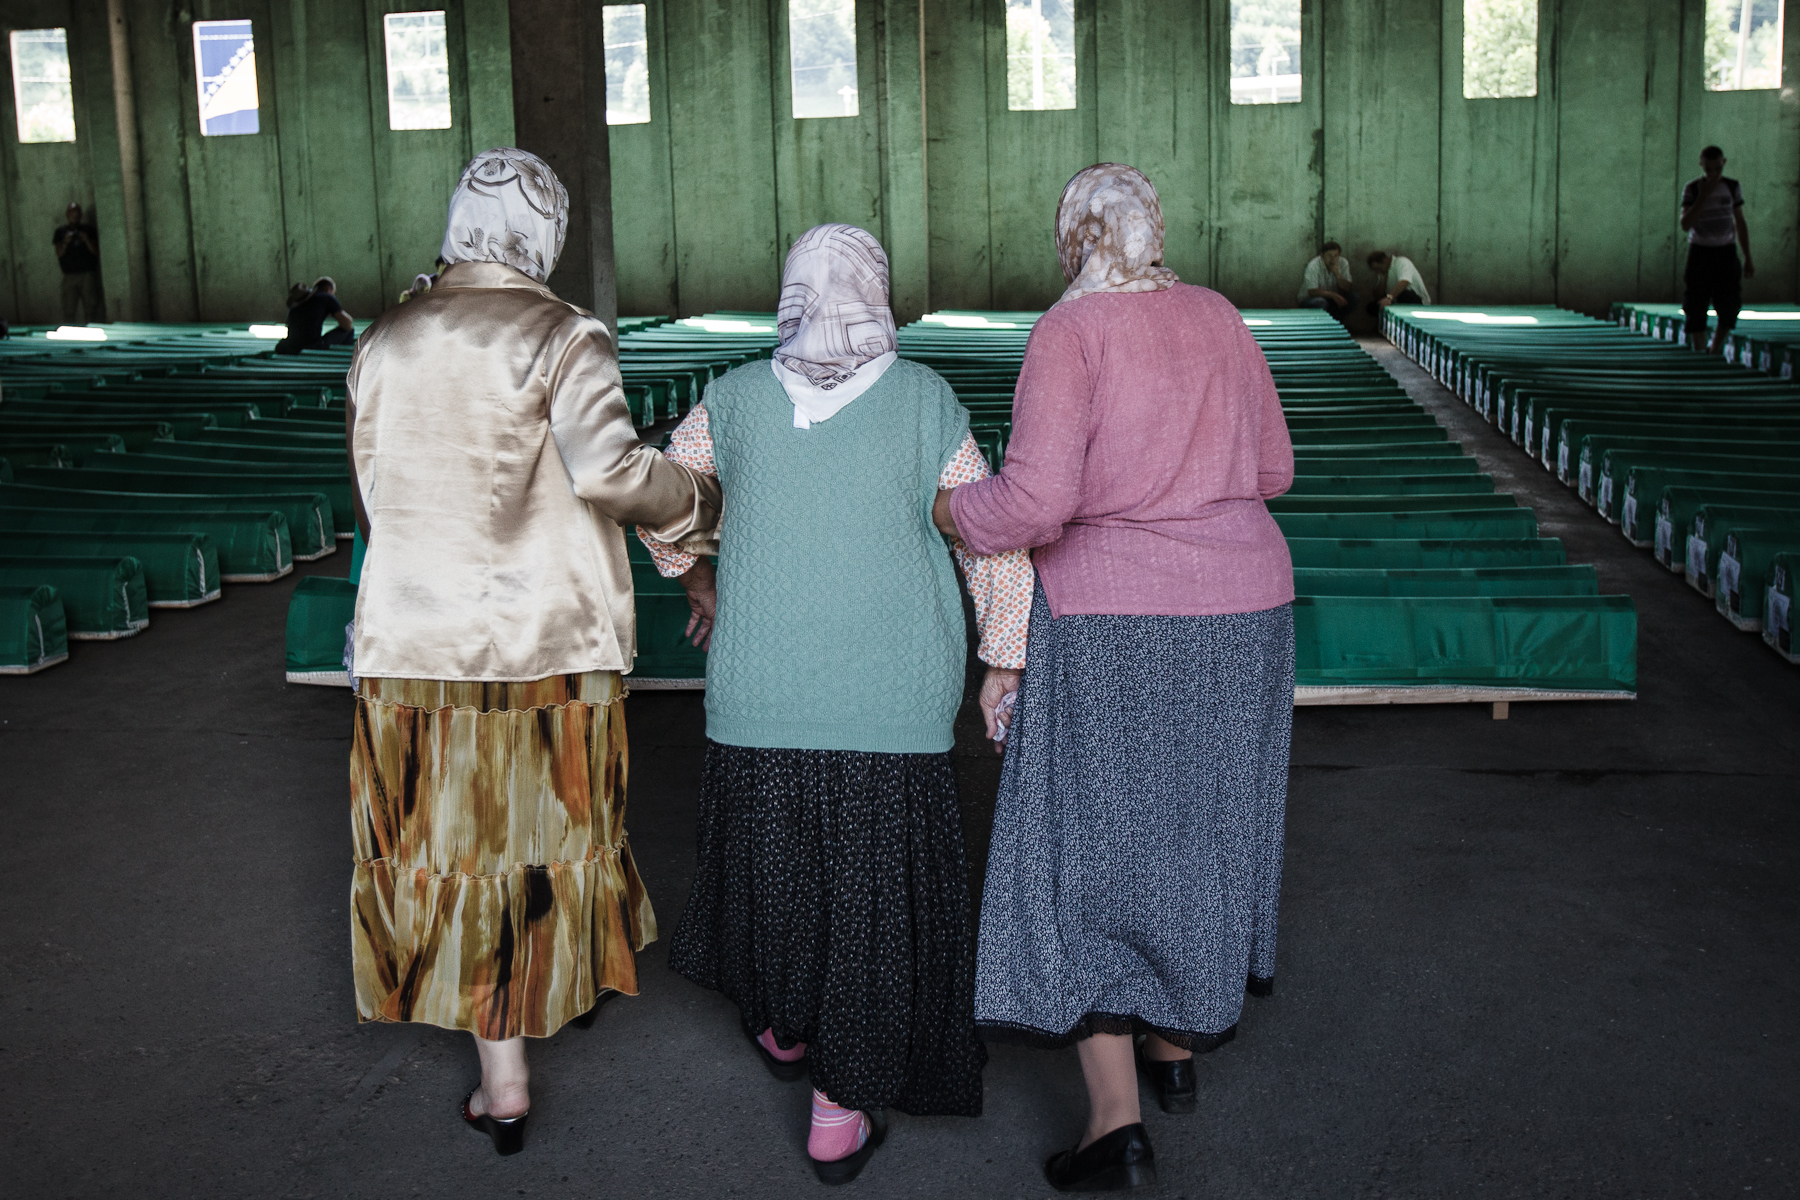 Bosnian women enter a hall full of coffins to search for their loved ones in the Potocari memorial center, Srebrenica, July 10, 2010.